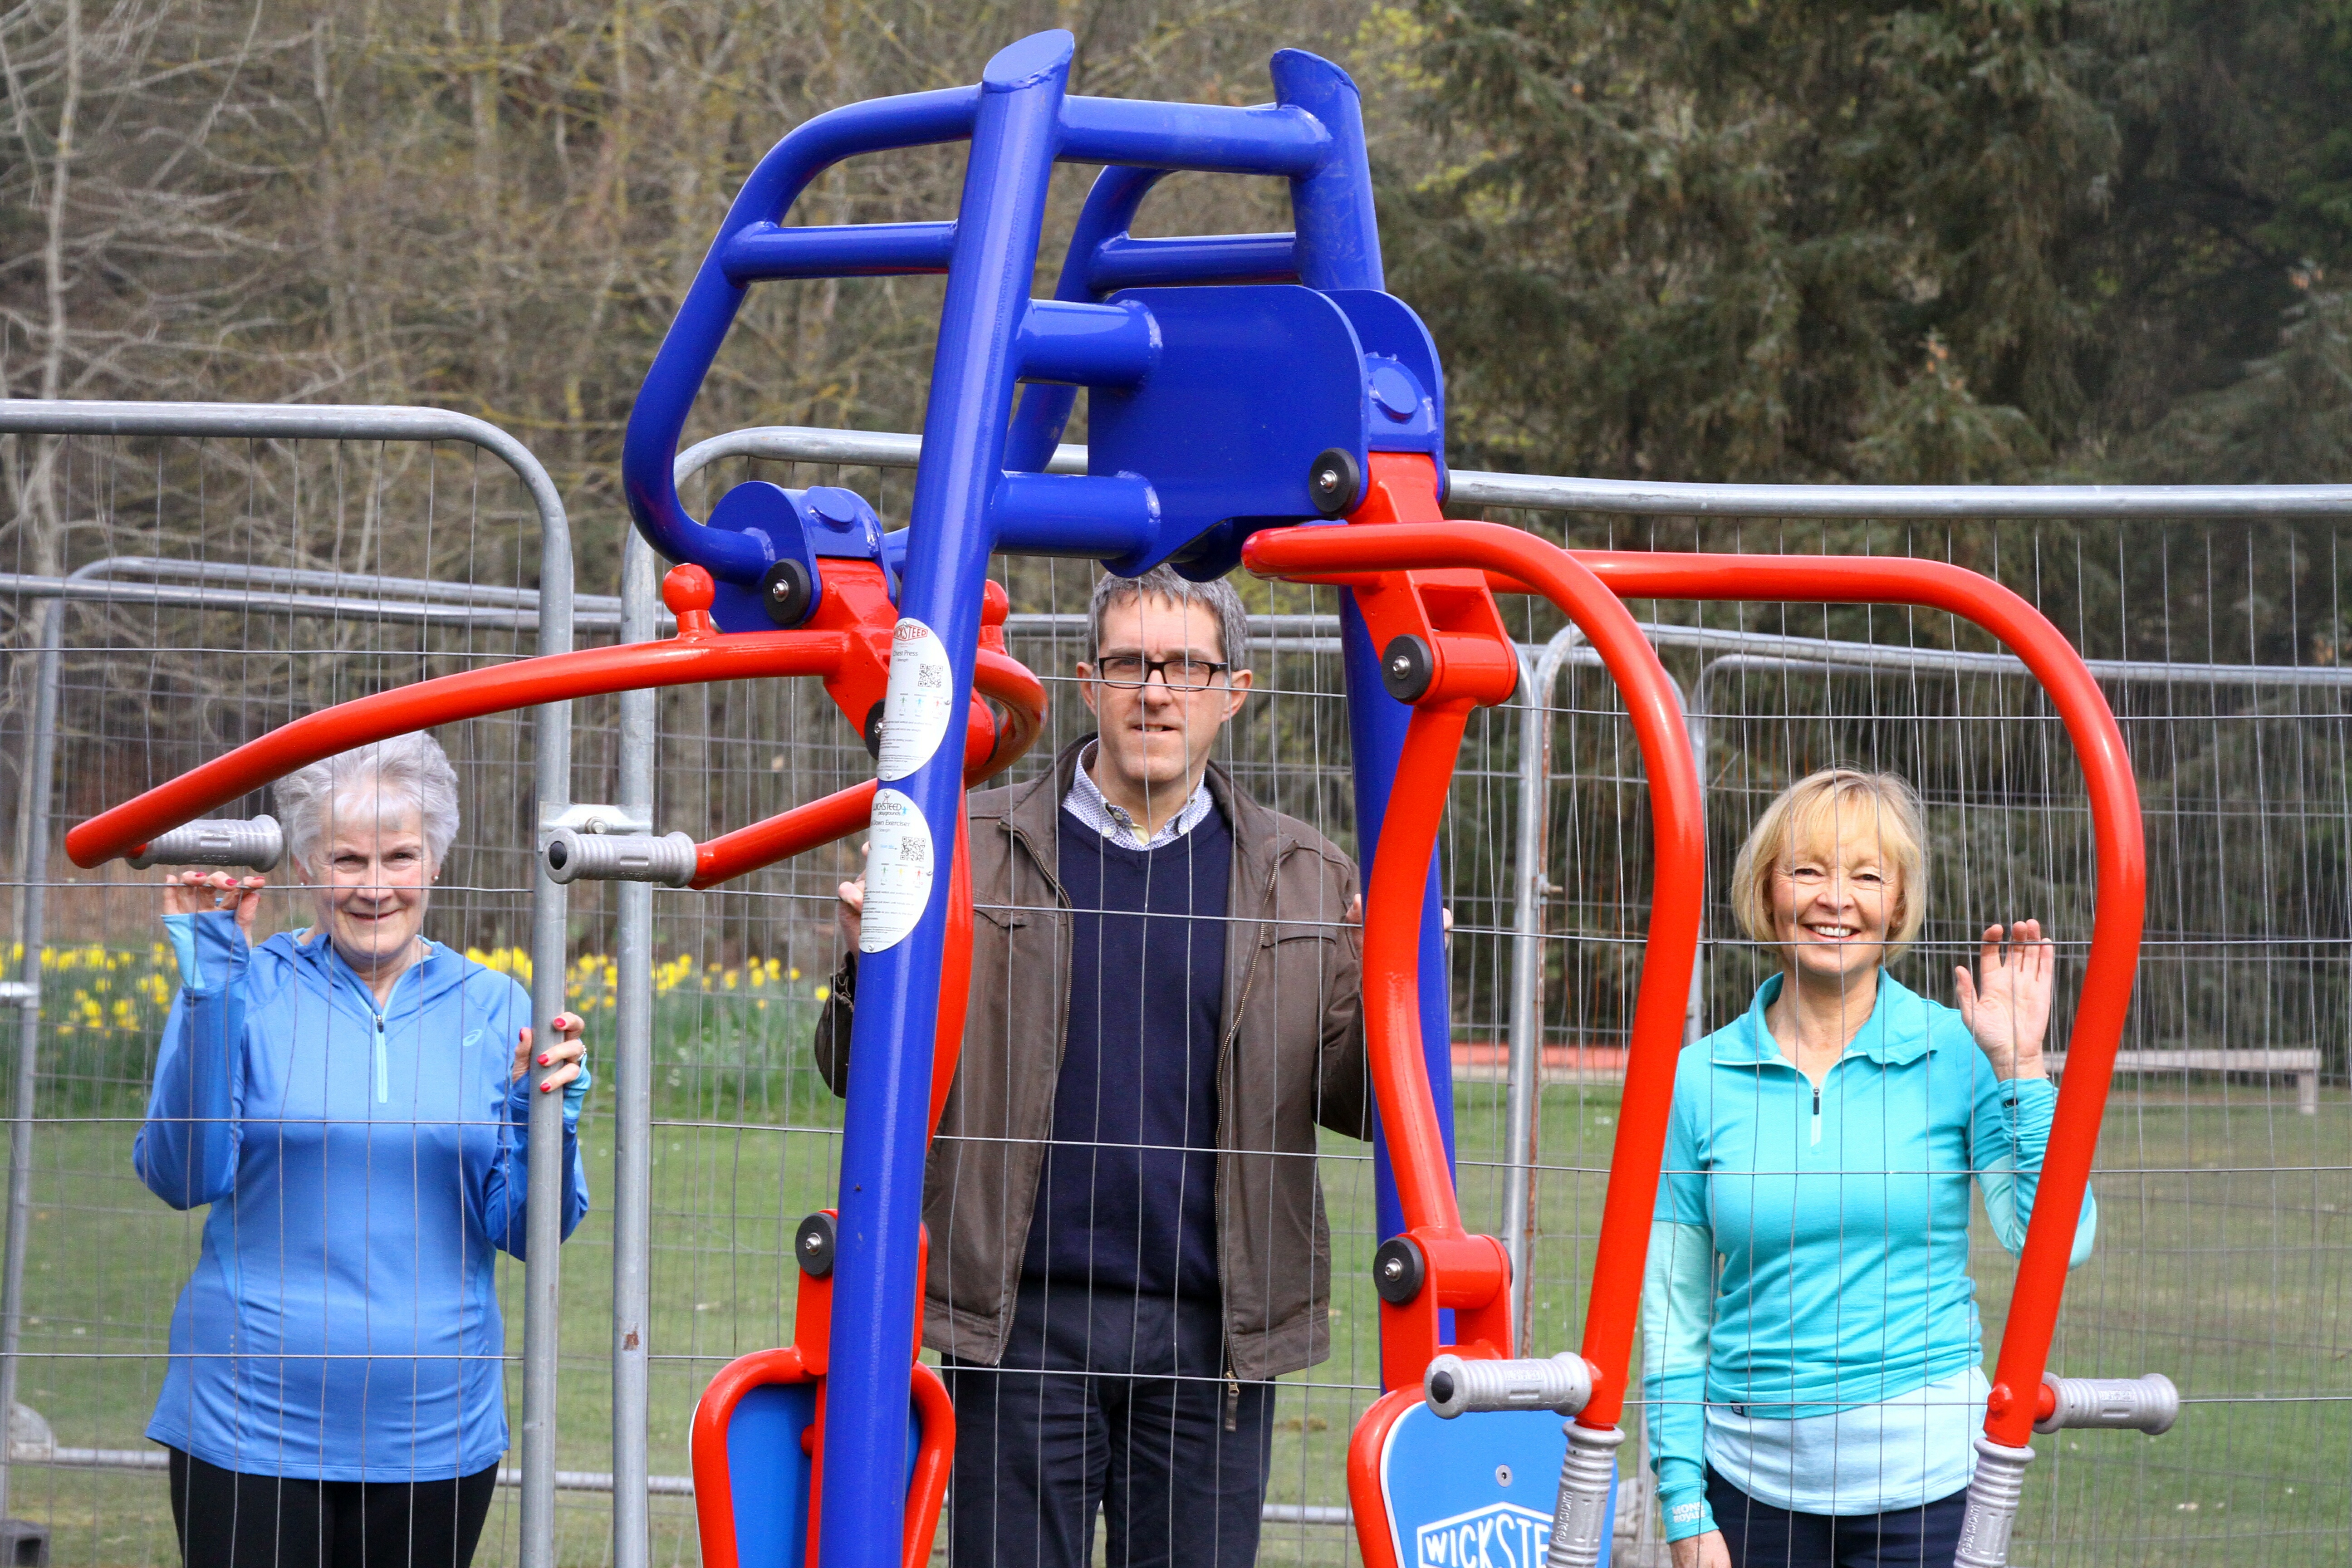 Eileen Haggart, Dr Marc Jacobs and Janet Fowlie of the Edzell Village Improvement Society beside the new gym equipment.